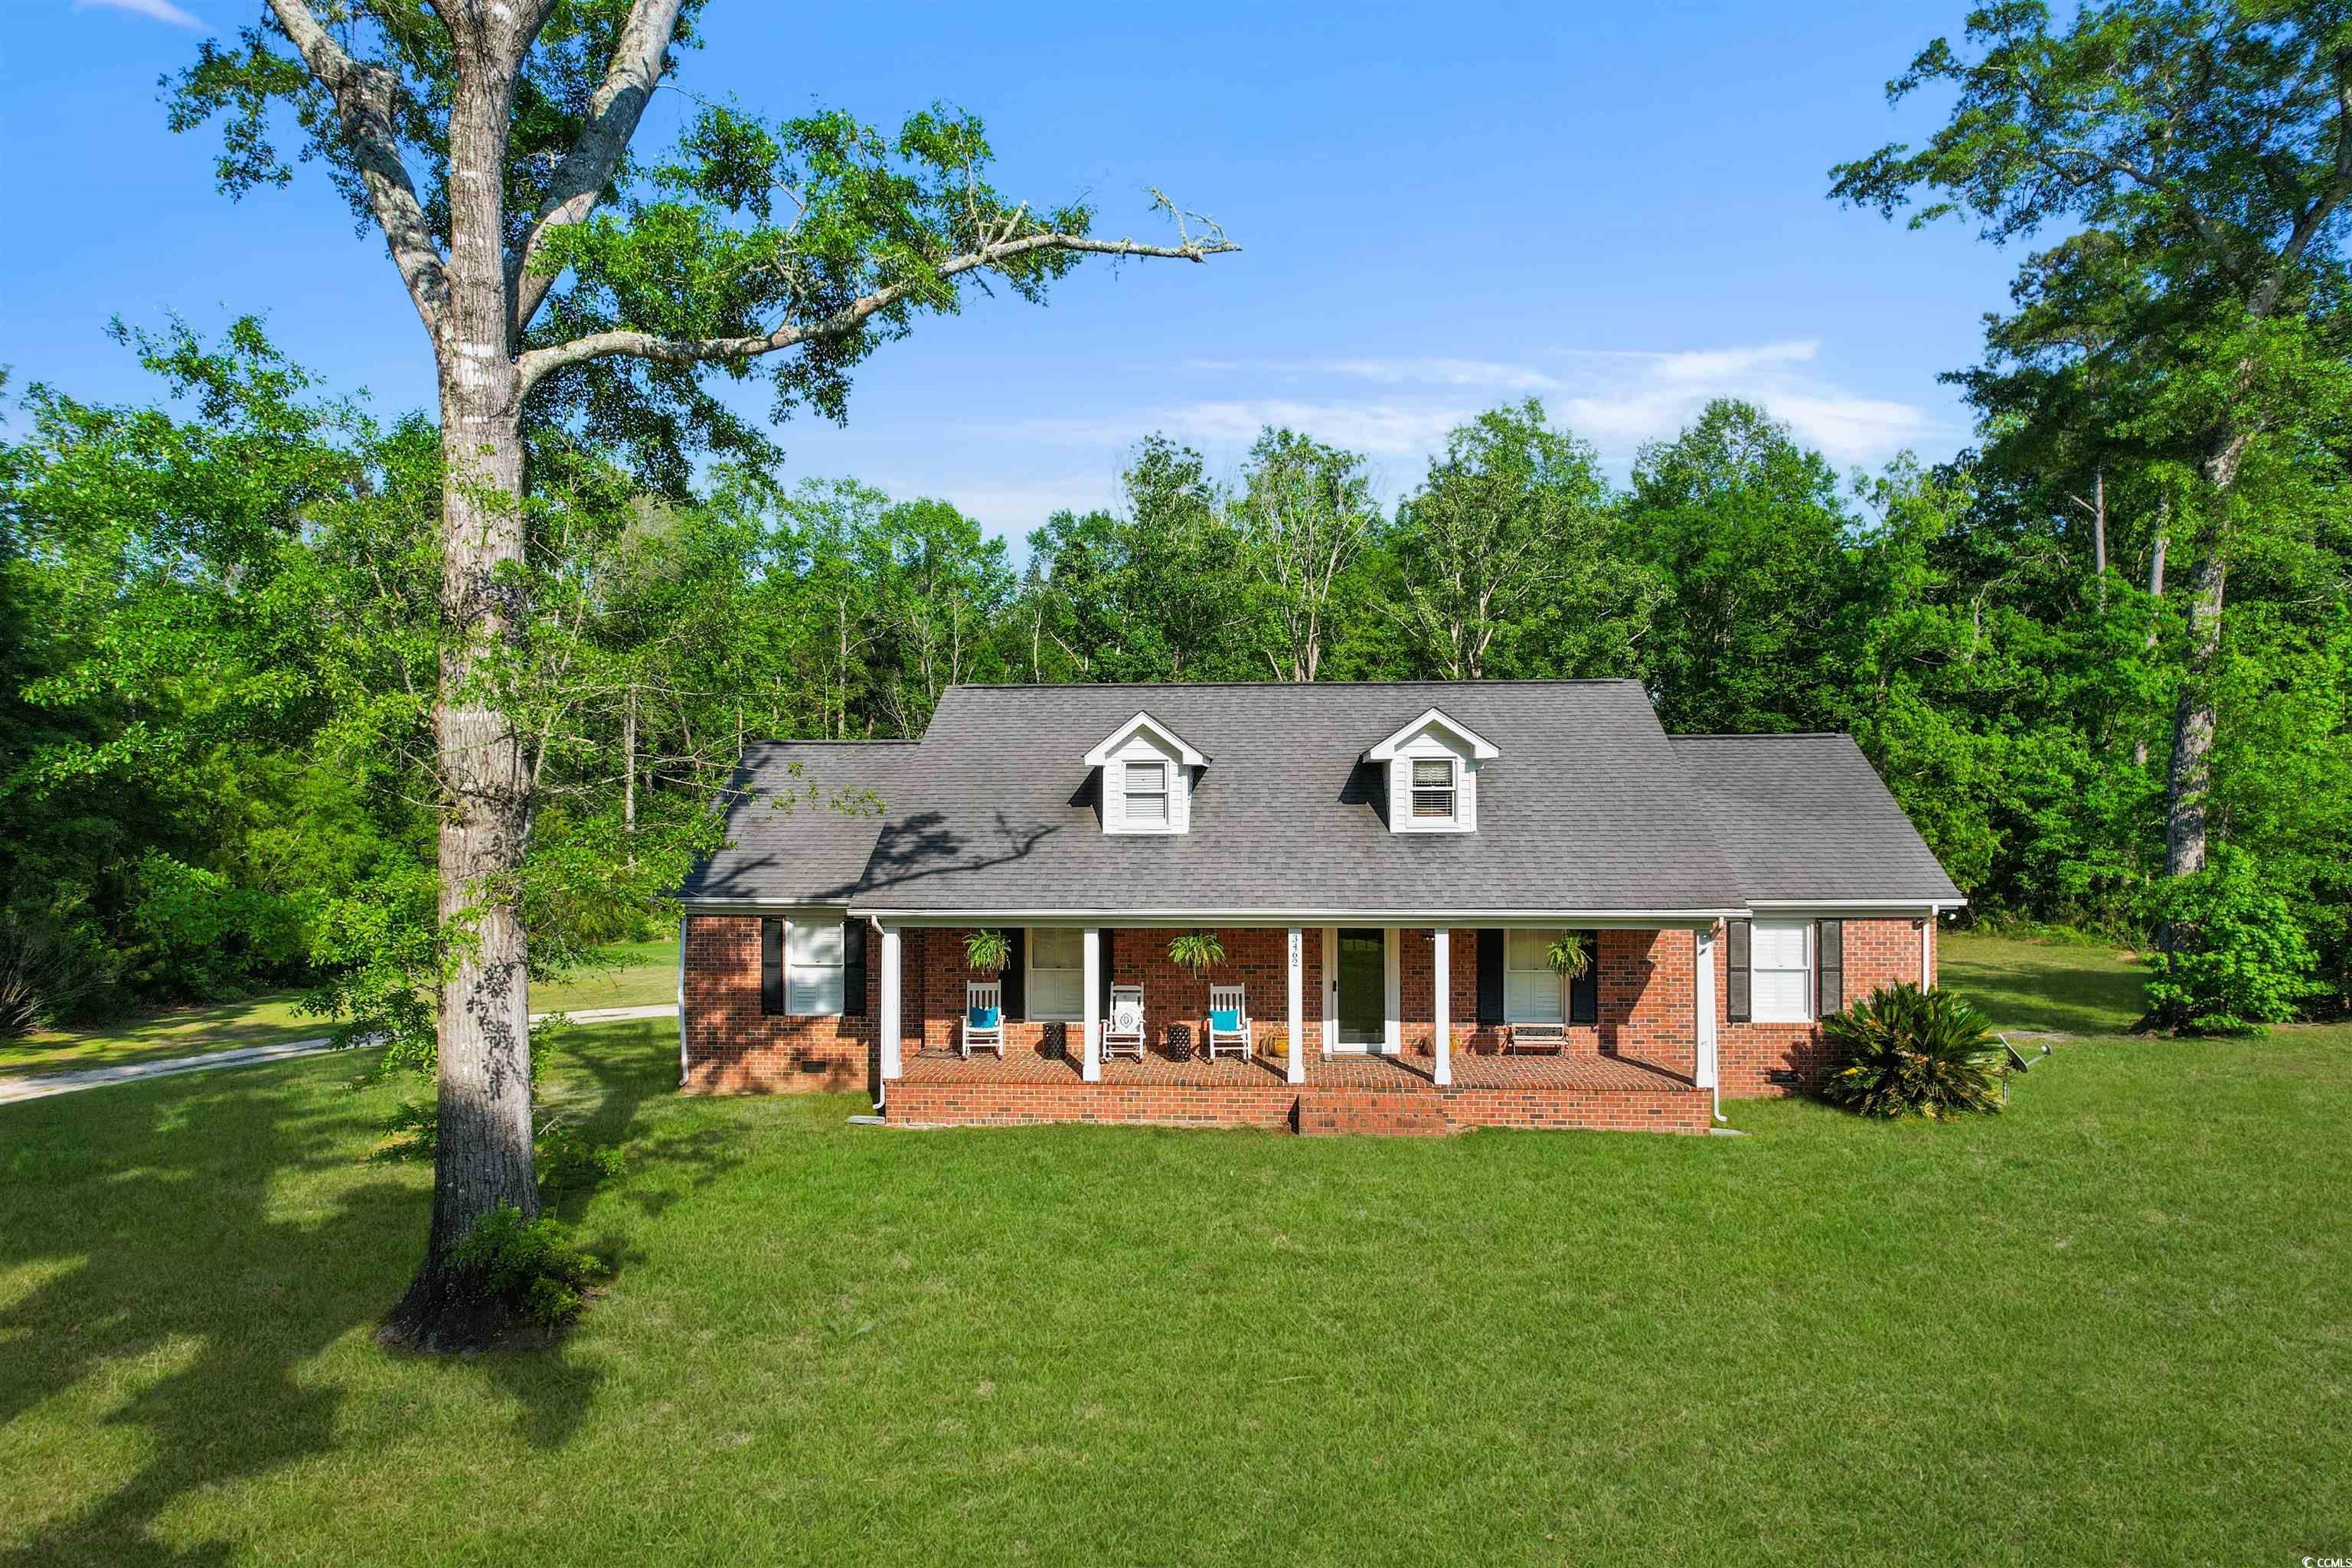 Photo one of 3462 Cannon Pond Rd. Conway SC 29527 | MLS 2410150